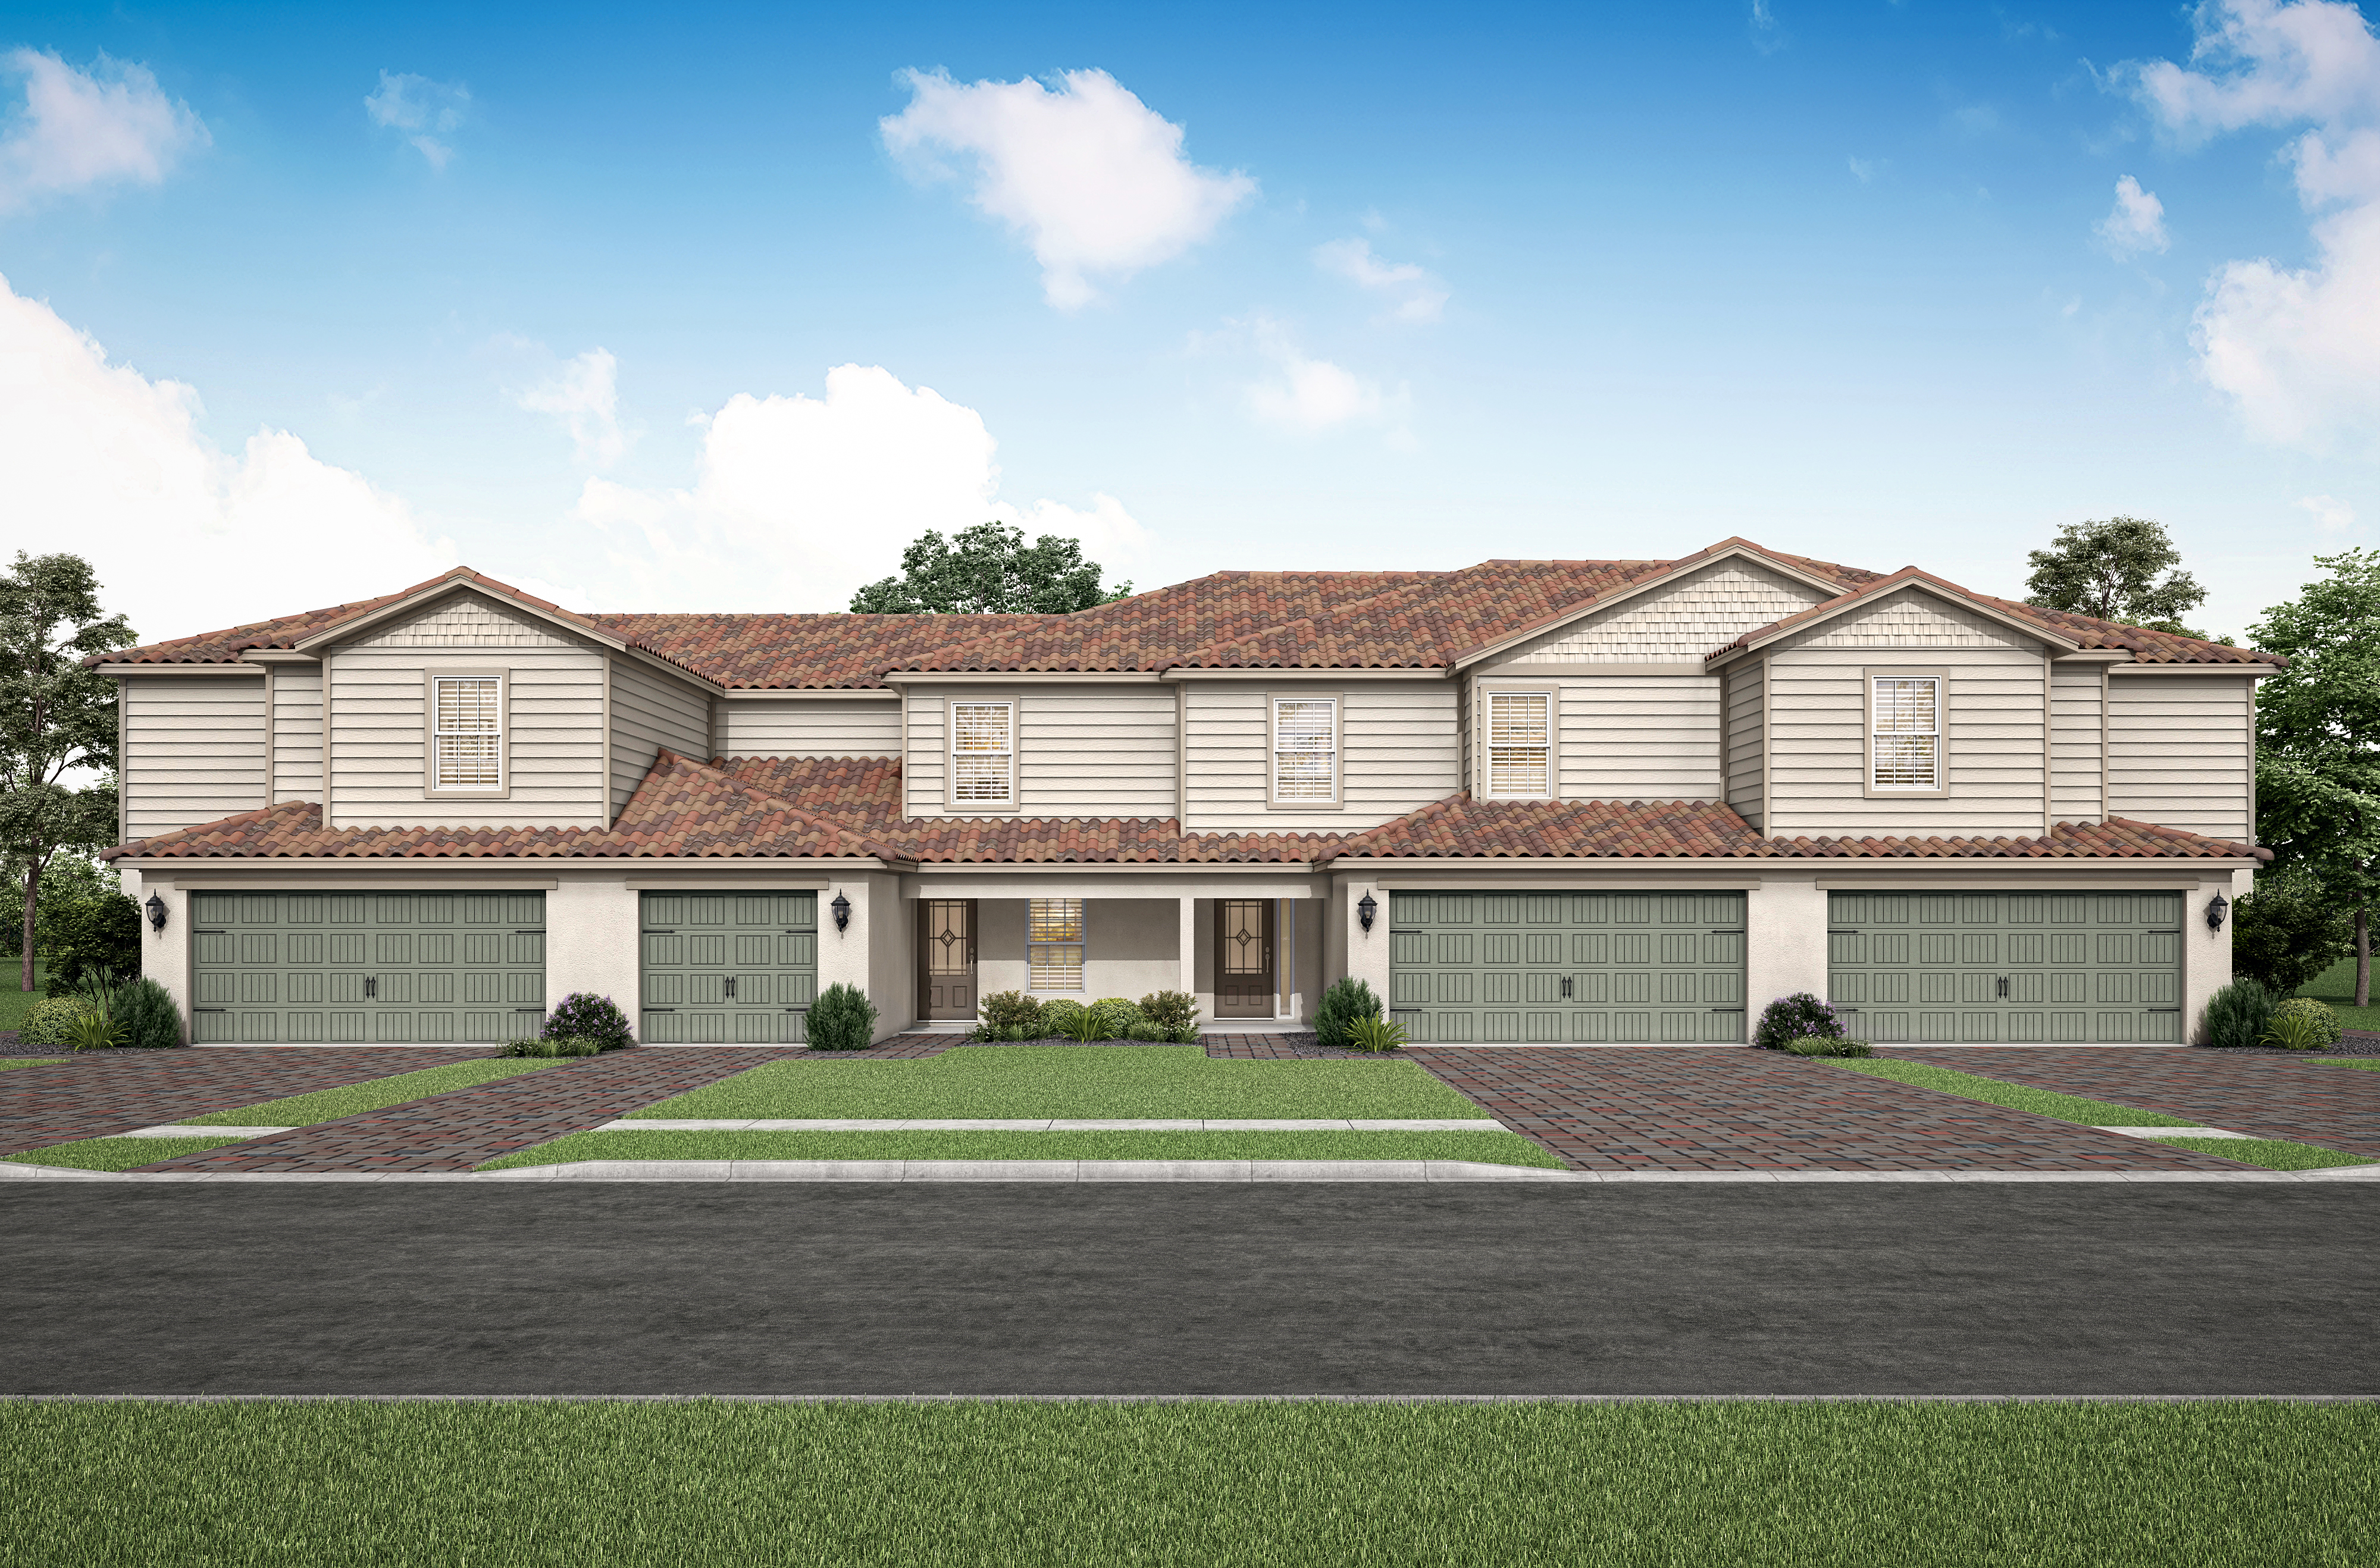 Townhomes at Noah Estates at Tuscany Preserve in Poinciana, FL feature two and three bedrooms floor plans.